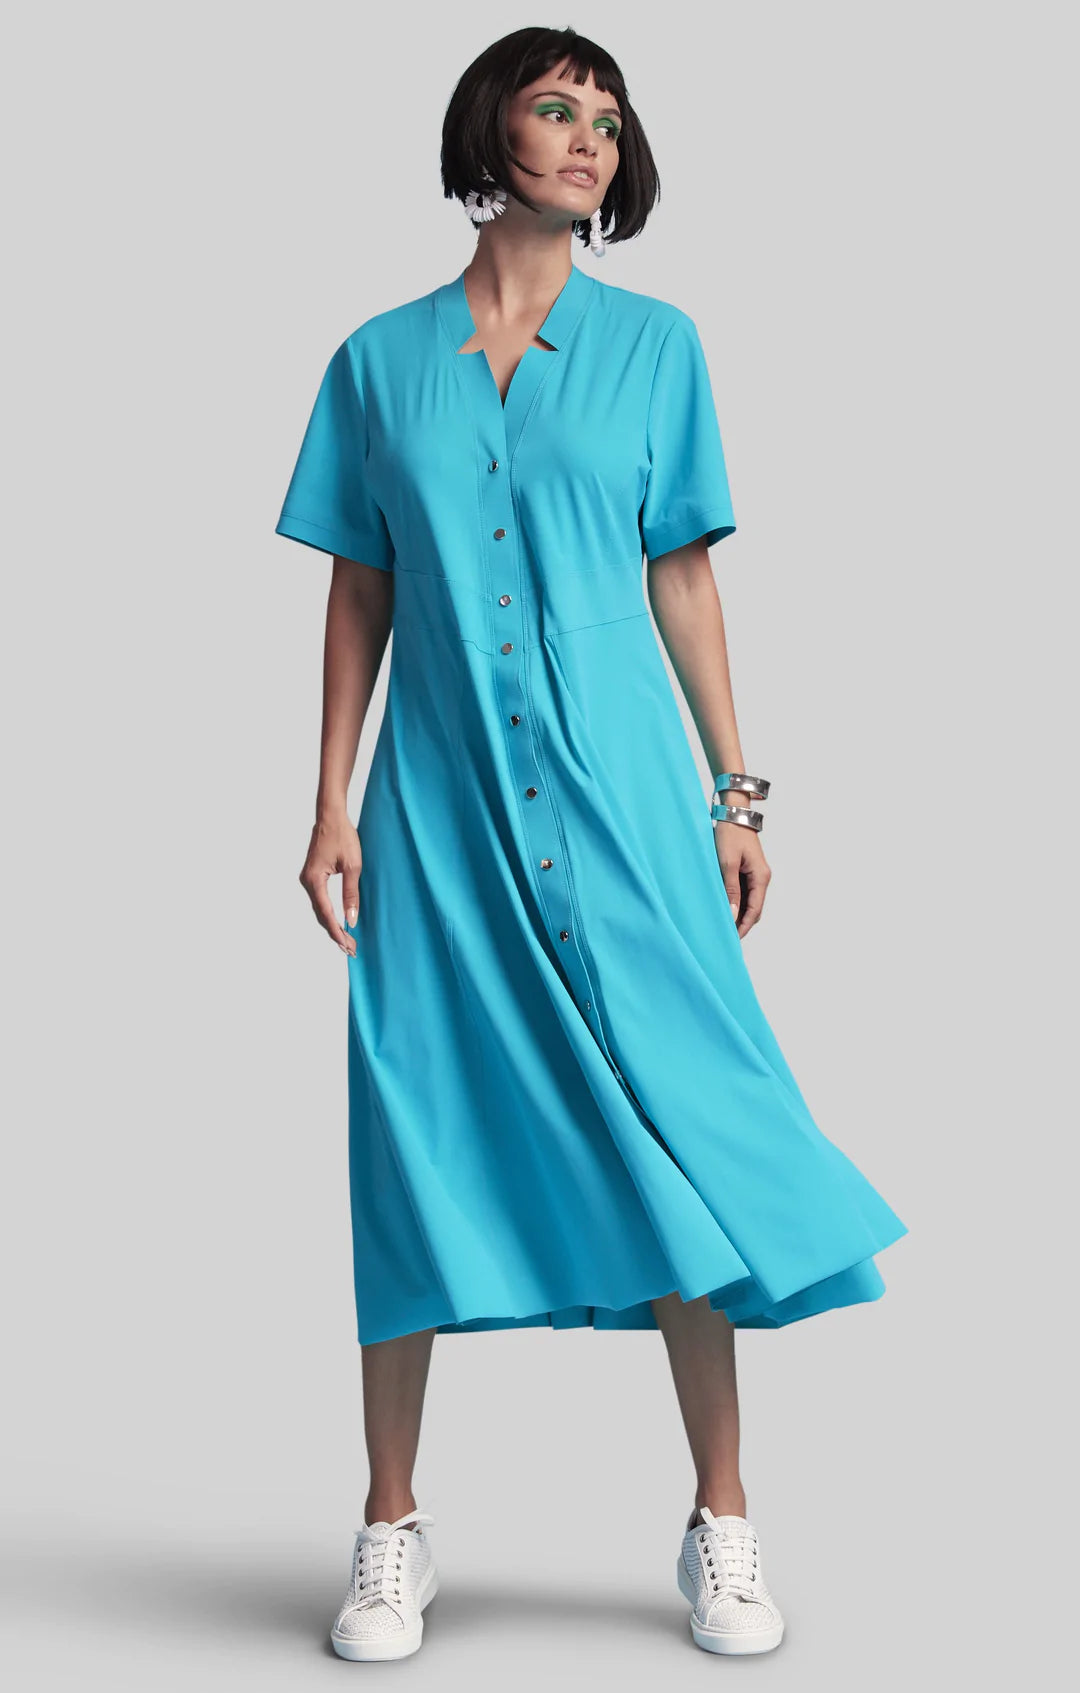 Paula Ryan Notched Neck Dome Front Shirtdress - Teal